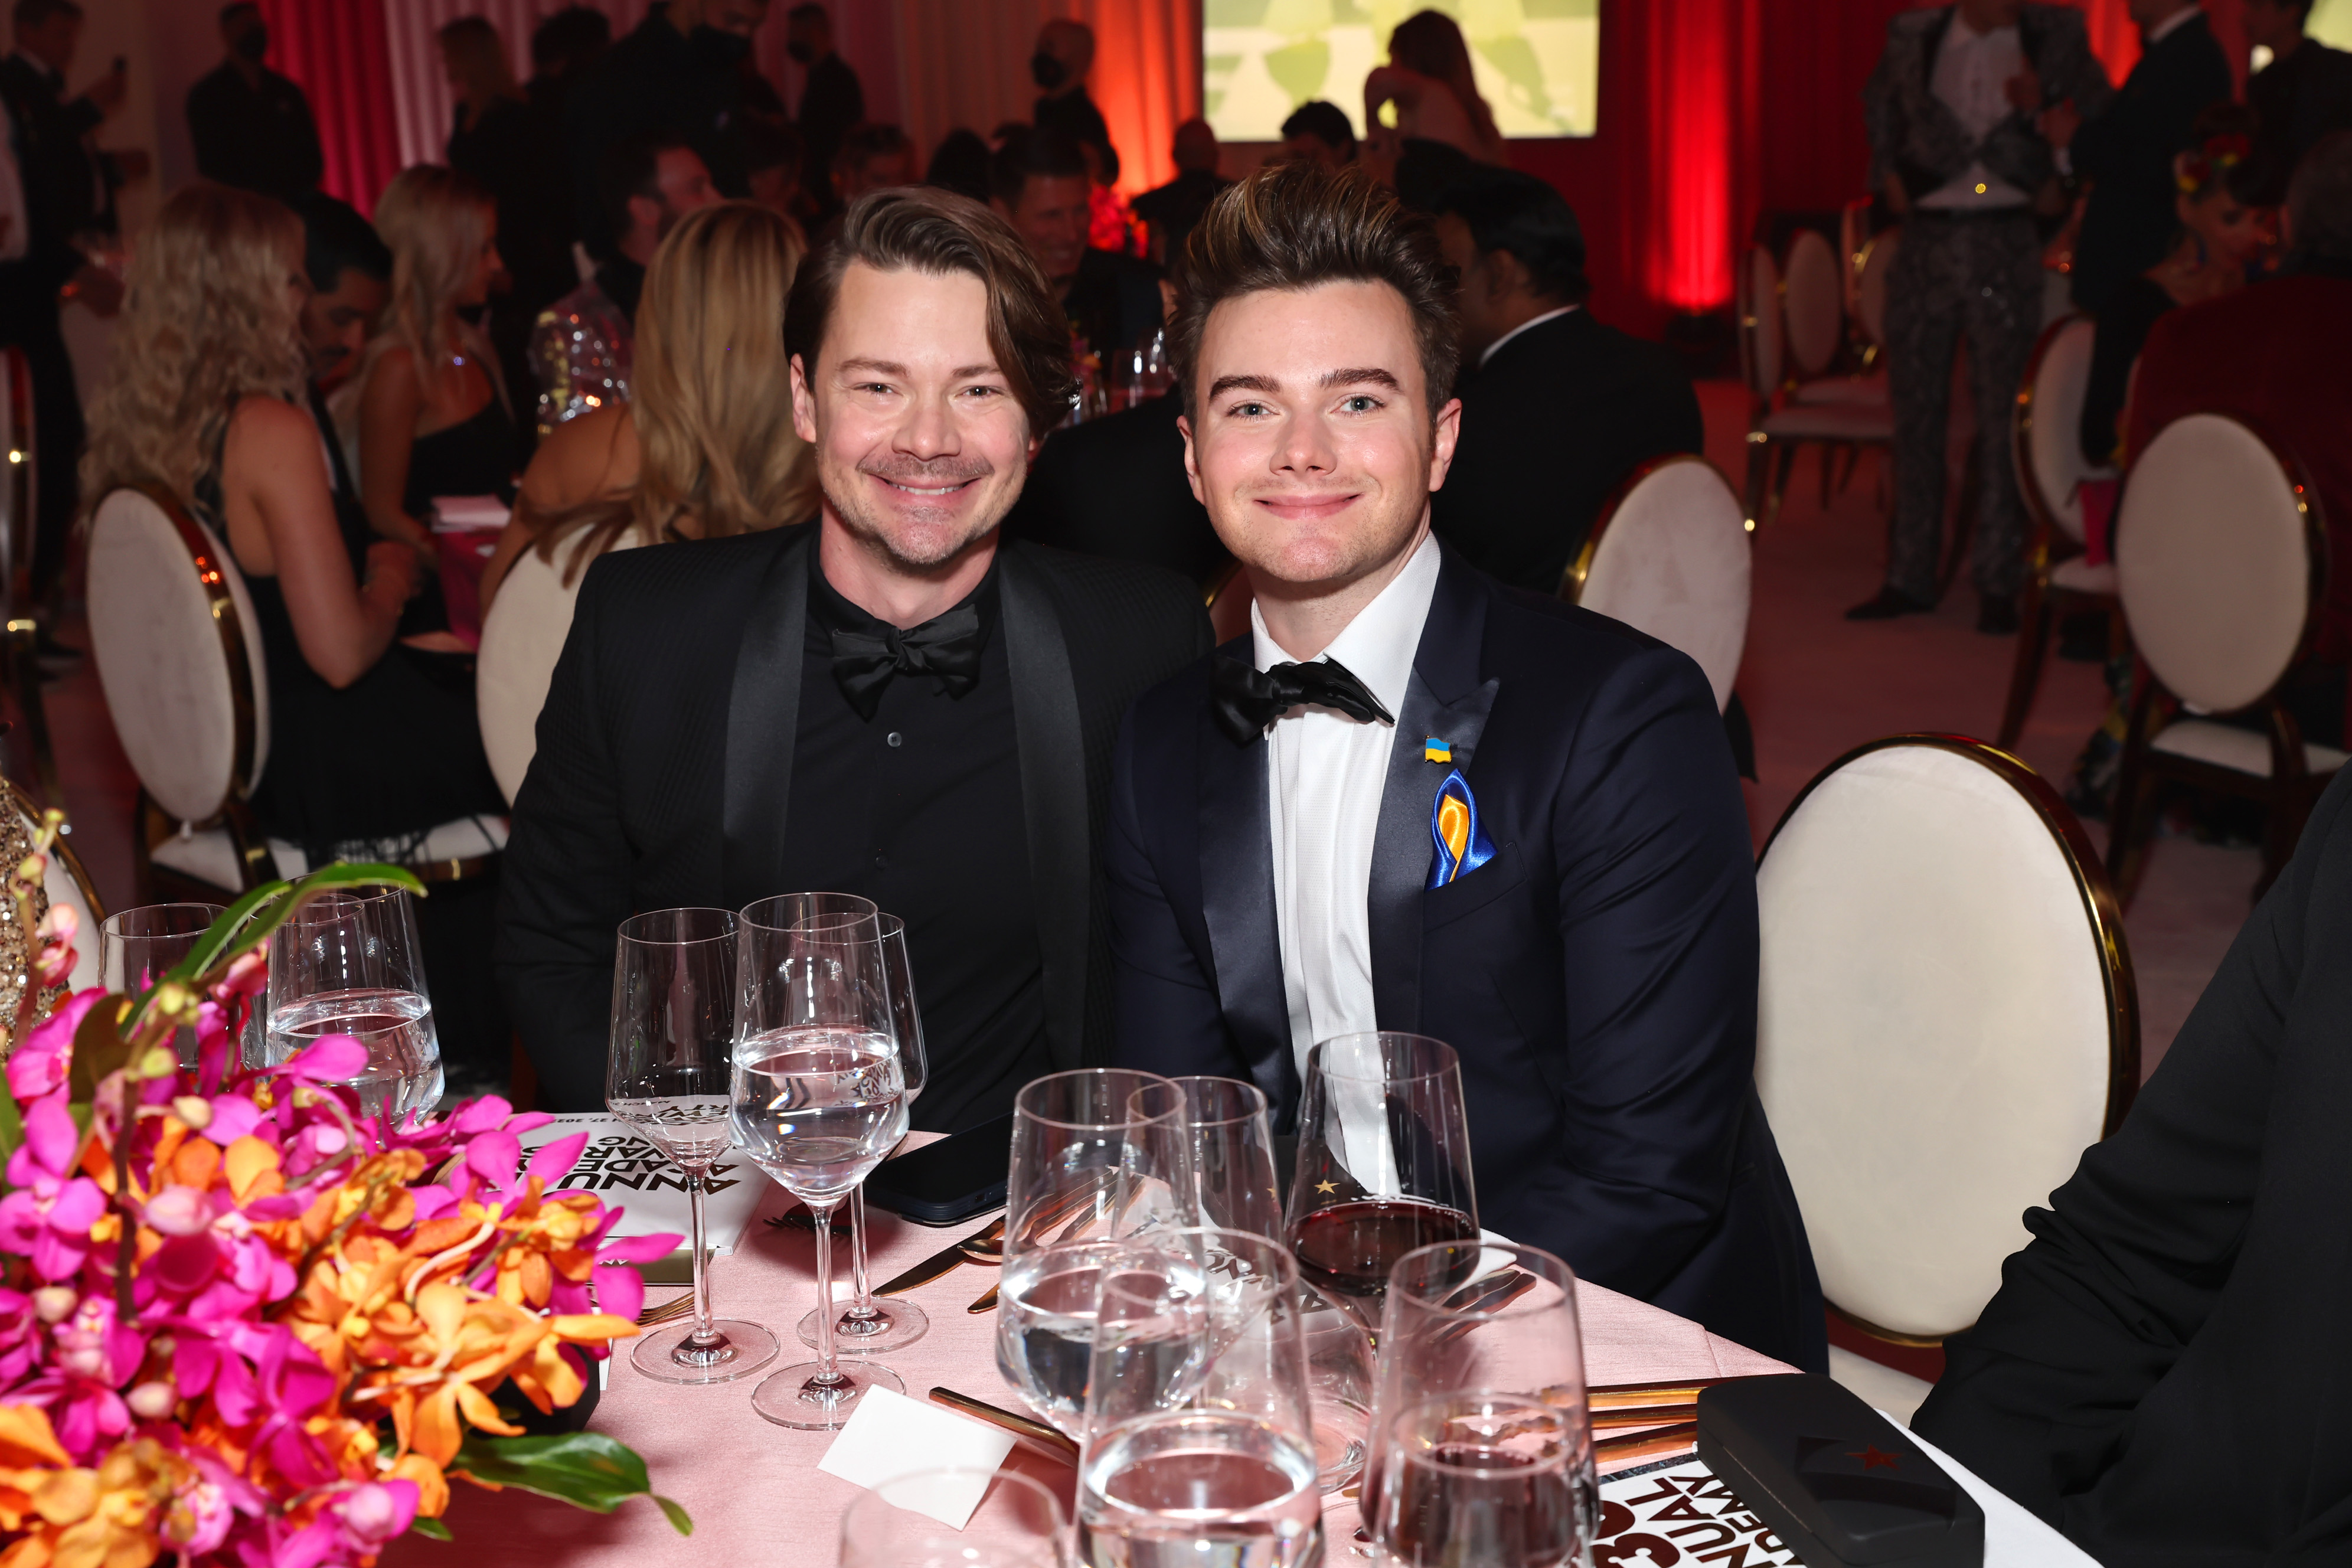 Will Sherrod and Chris Colfer at the Elton John AIDS Foundation's 30th Annual Academy Awards Viewing Party on March 27, 2022, in California. | Source: Getty Images